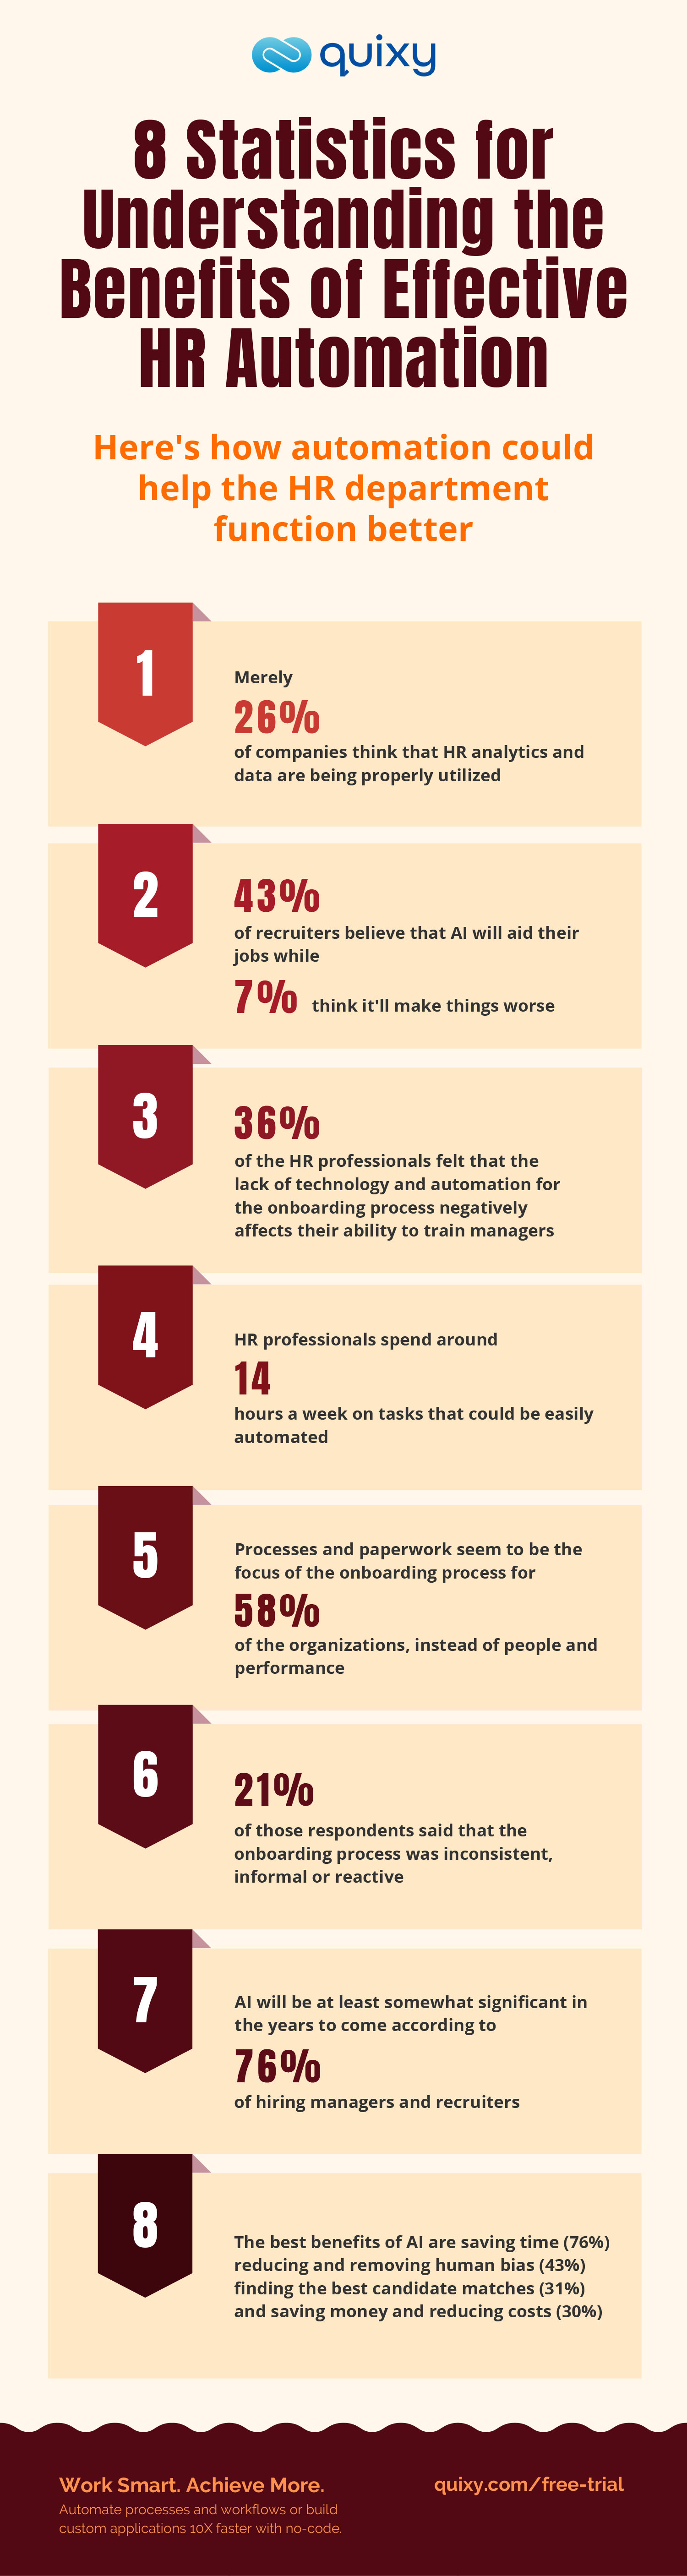 8 Statistics for Understanding the Benefits of Effective HR Automation